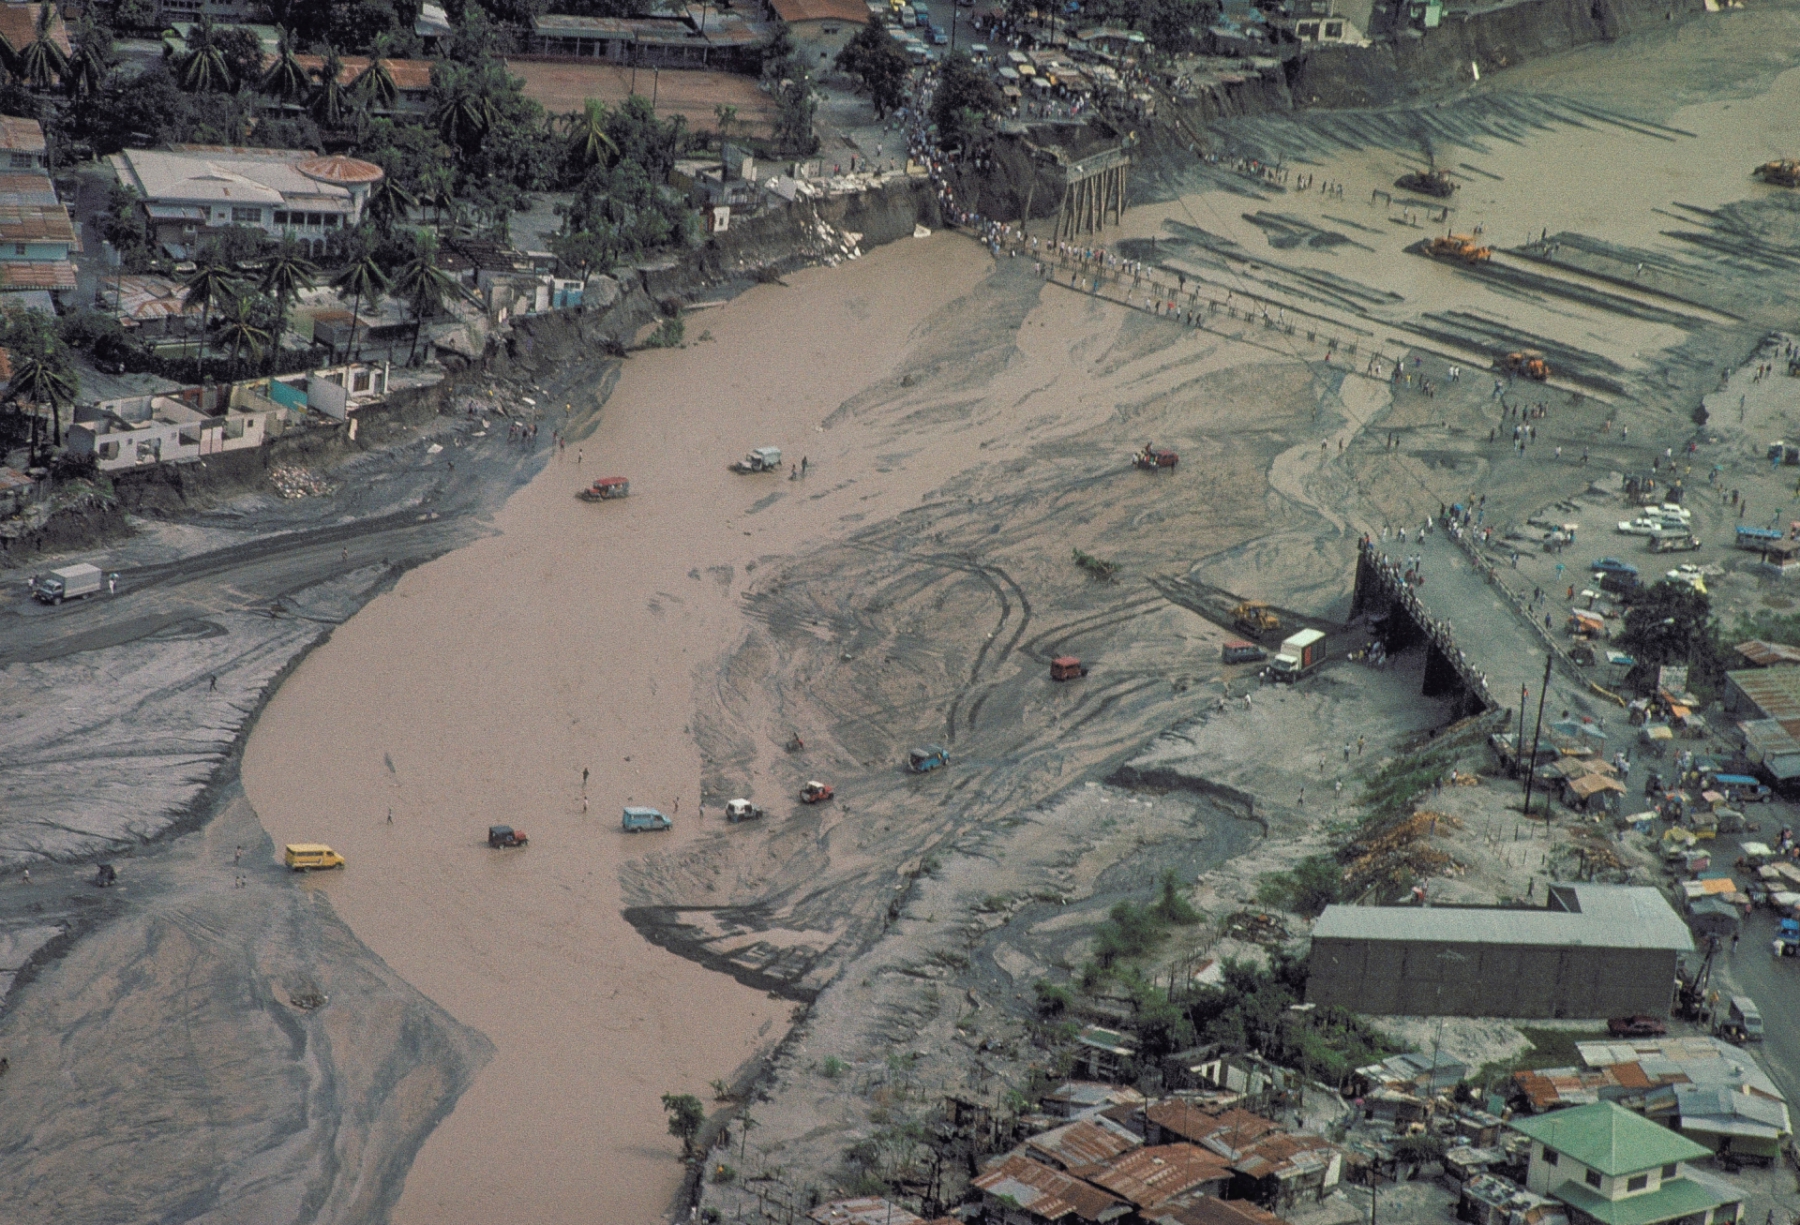 The eruption of Mount Pinatubo sent lahars and pyroclastic flows down the mountain, wiping out bridges and other infrastructure downstream. (Source: USGS)